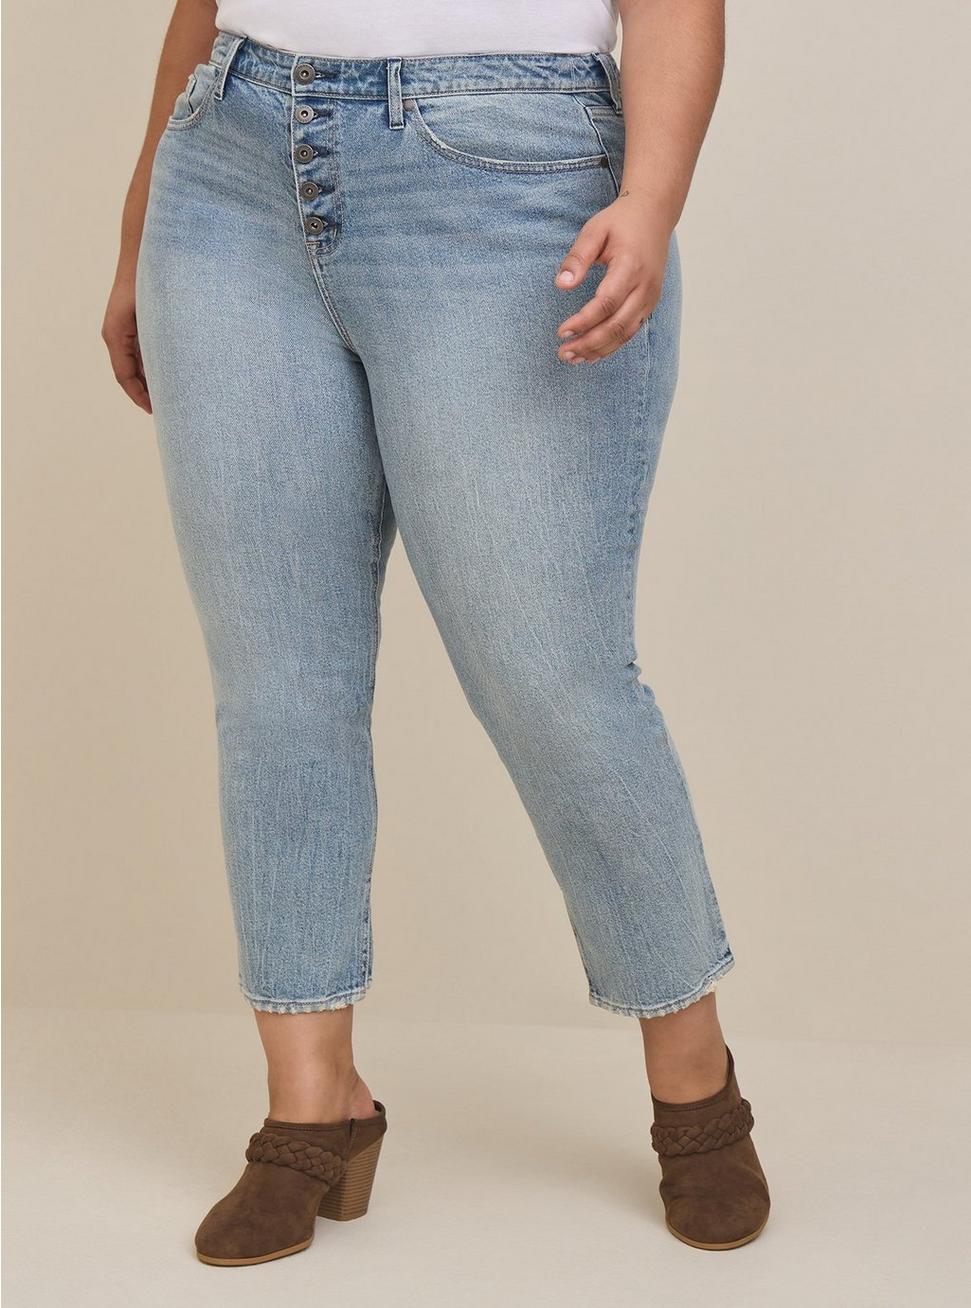 Mom Straight Vintage Stretch High-Rise Jean, STRAIGHT UP, hi-res